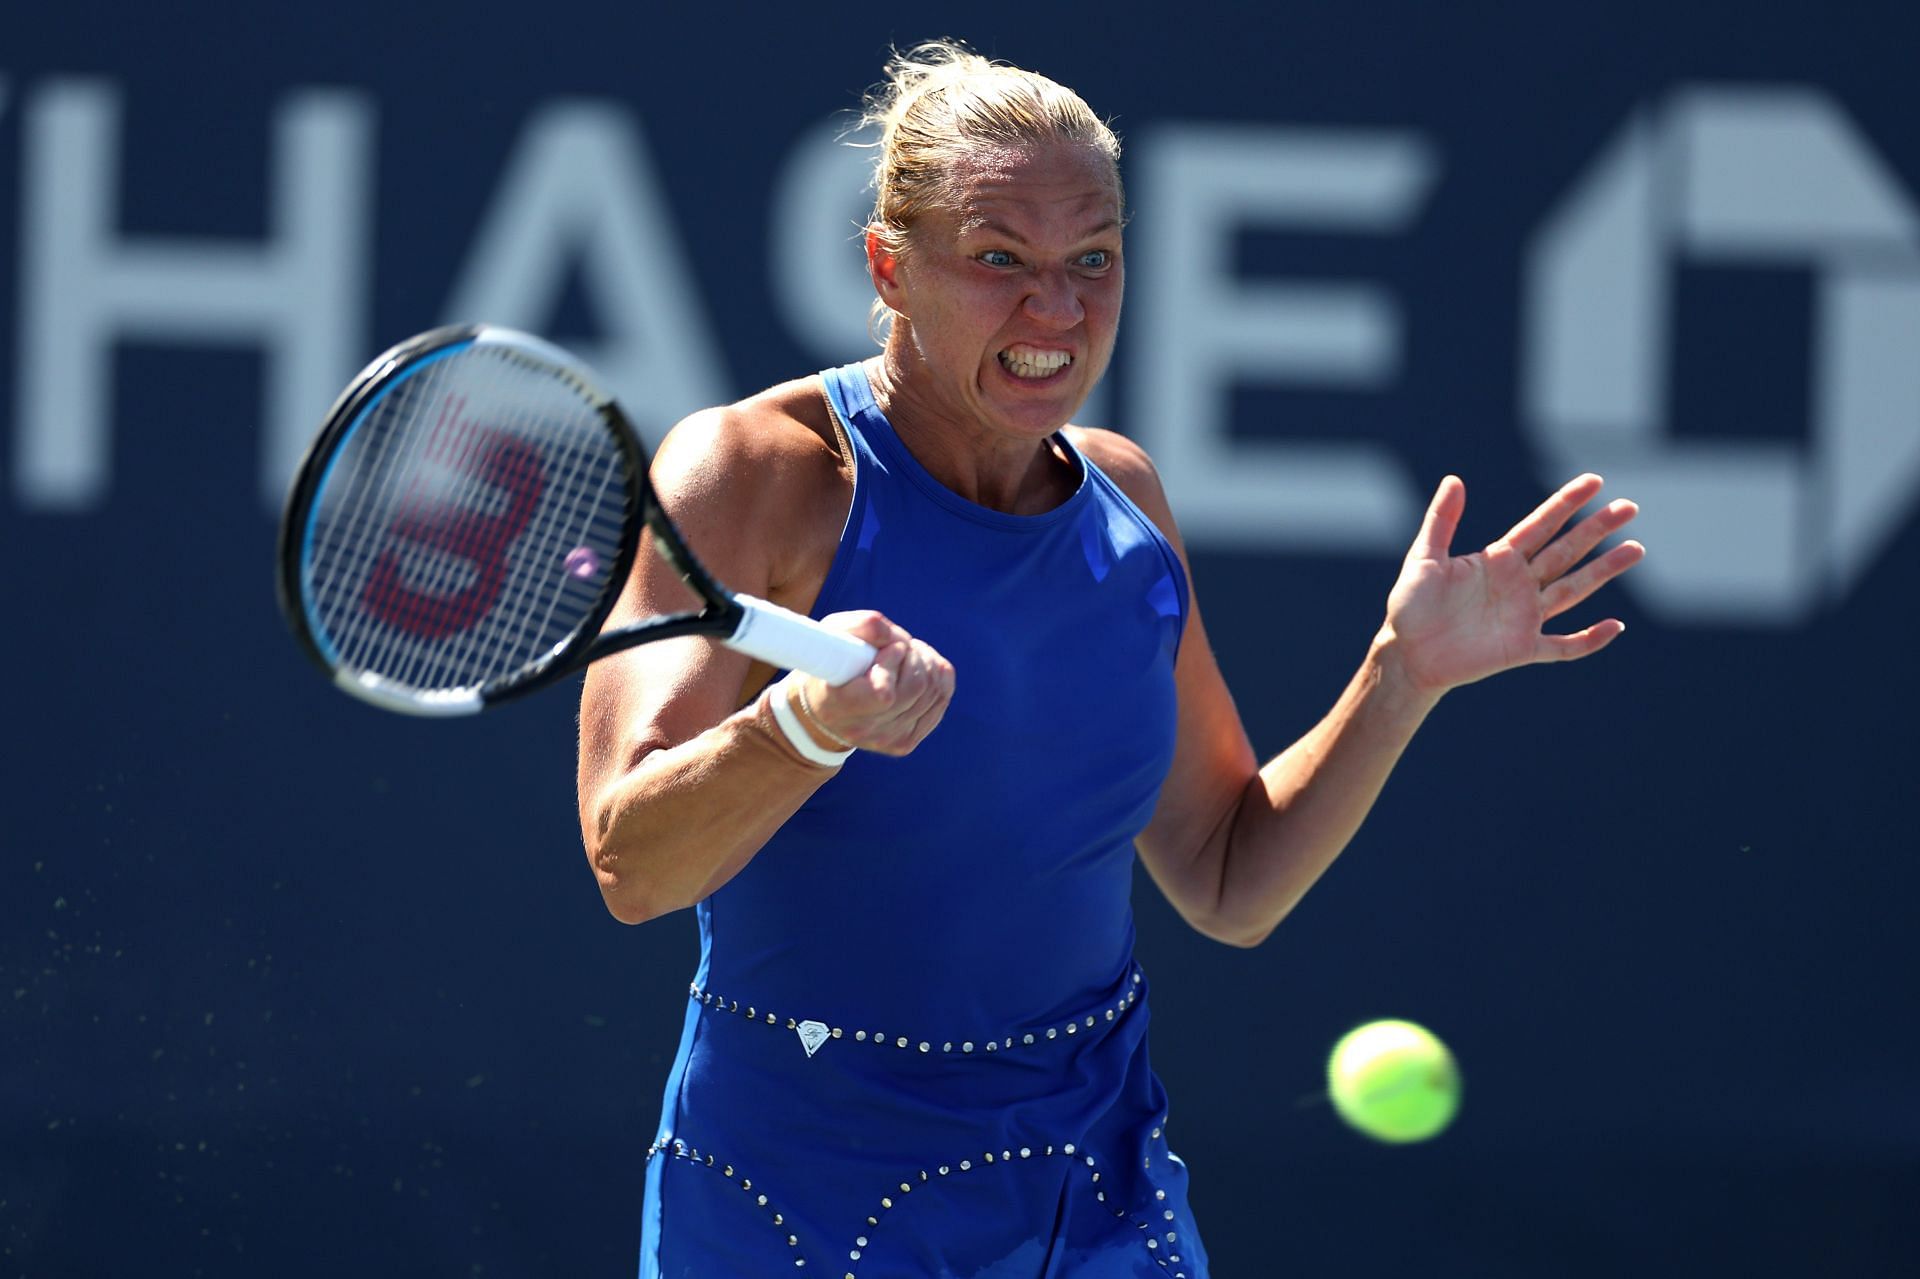 Kaia Kanepi in action at the 2022 US Open.